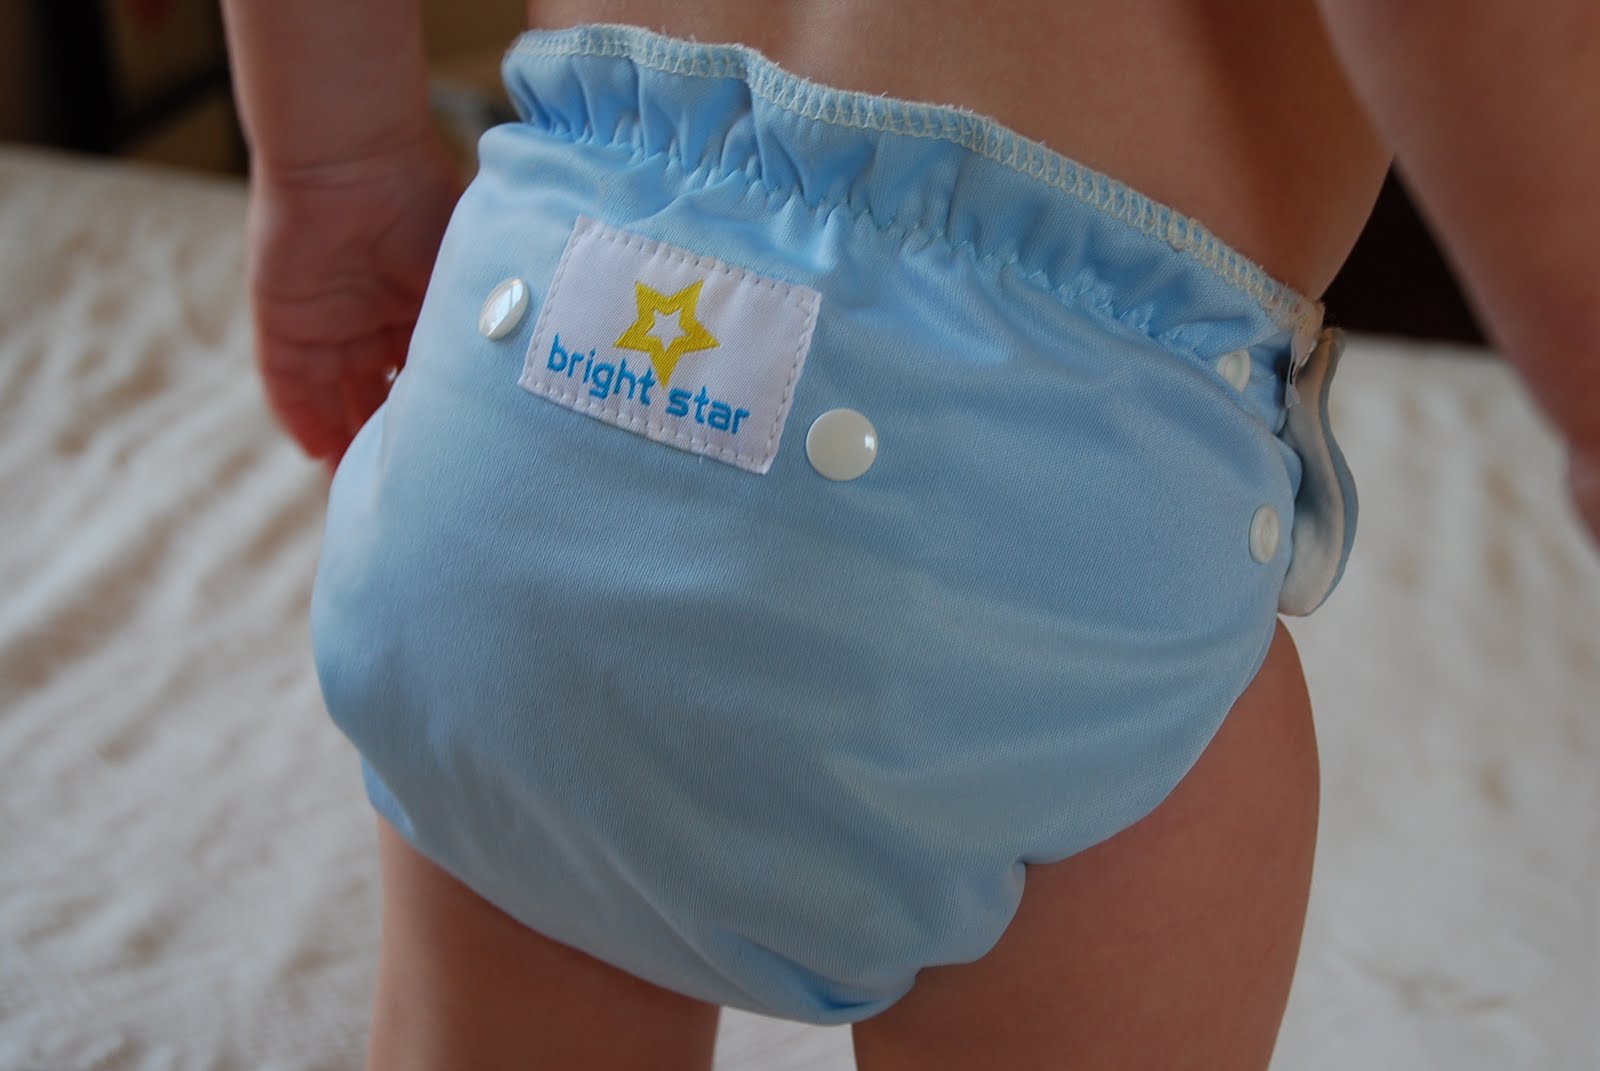 The maker of Fishnoodles diapers has created a new diaper line called. than...